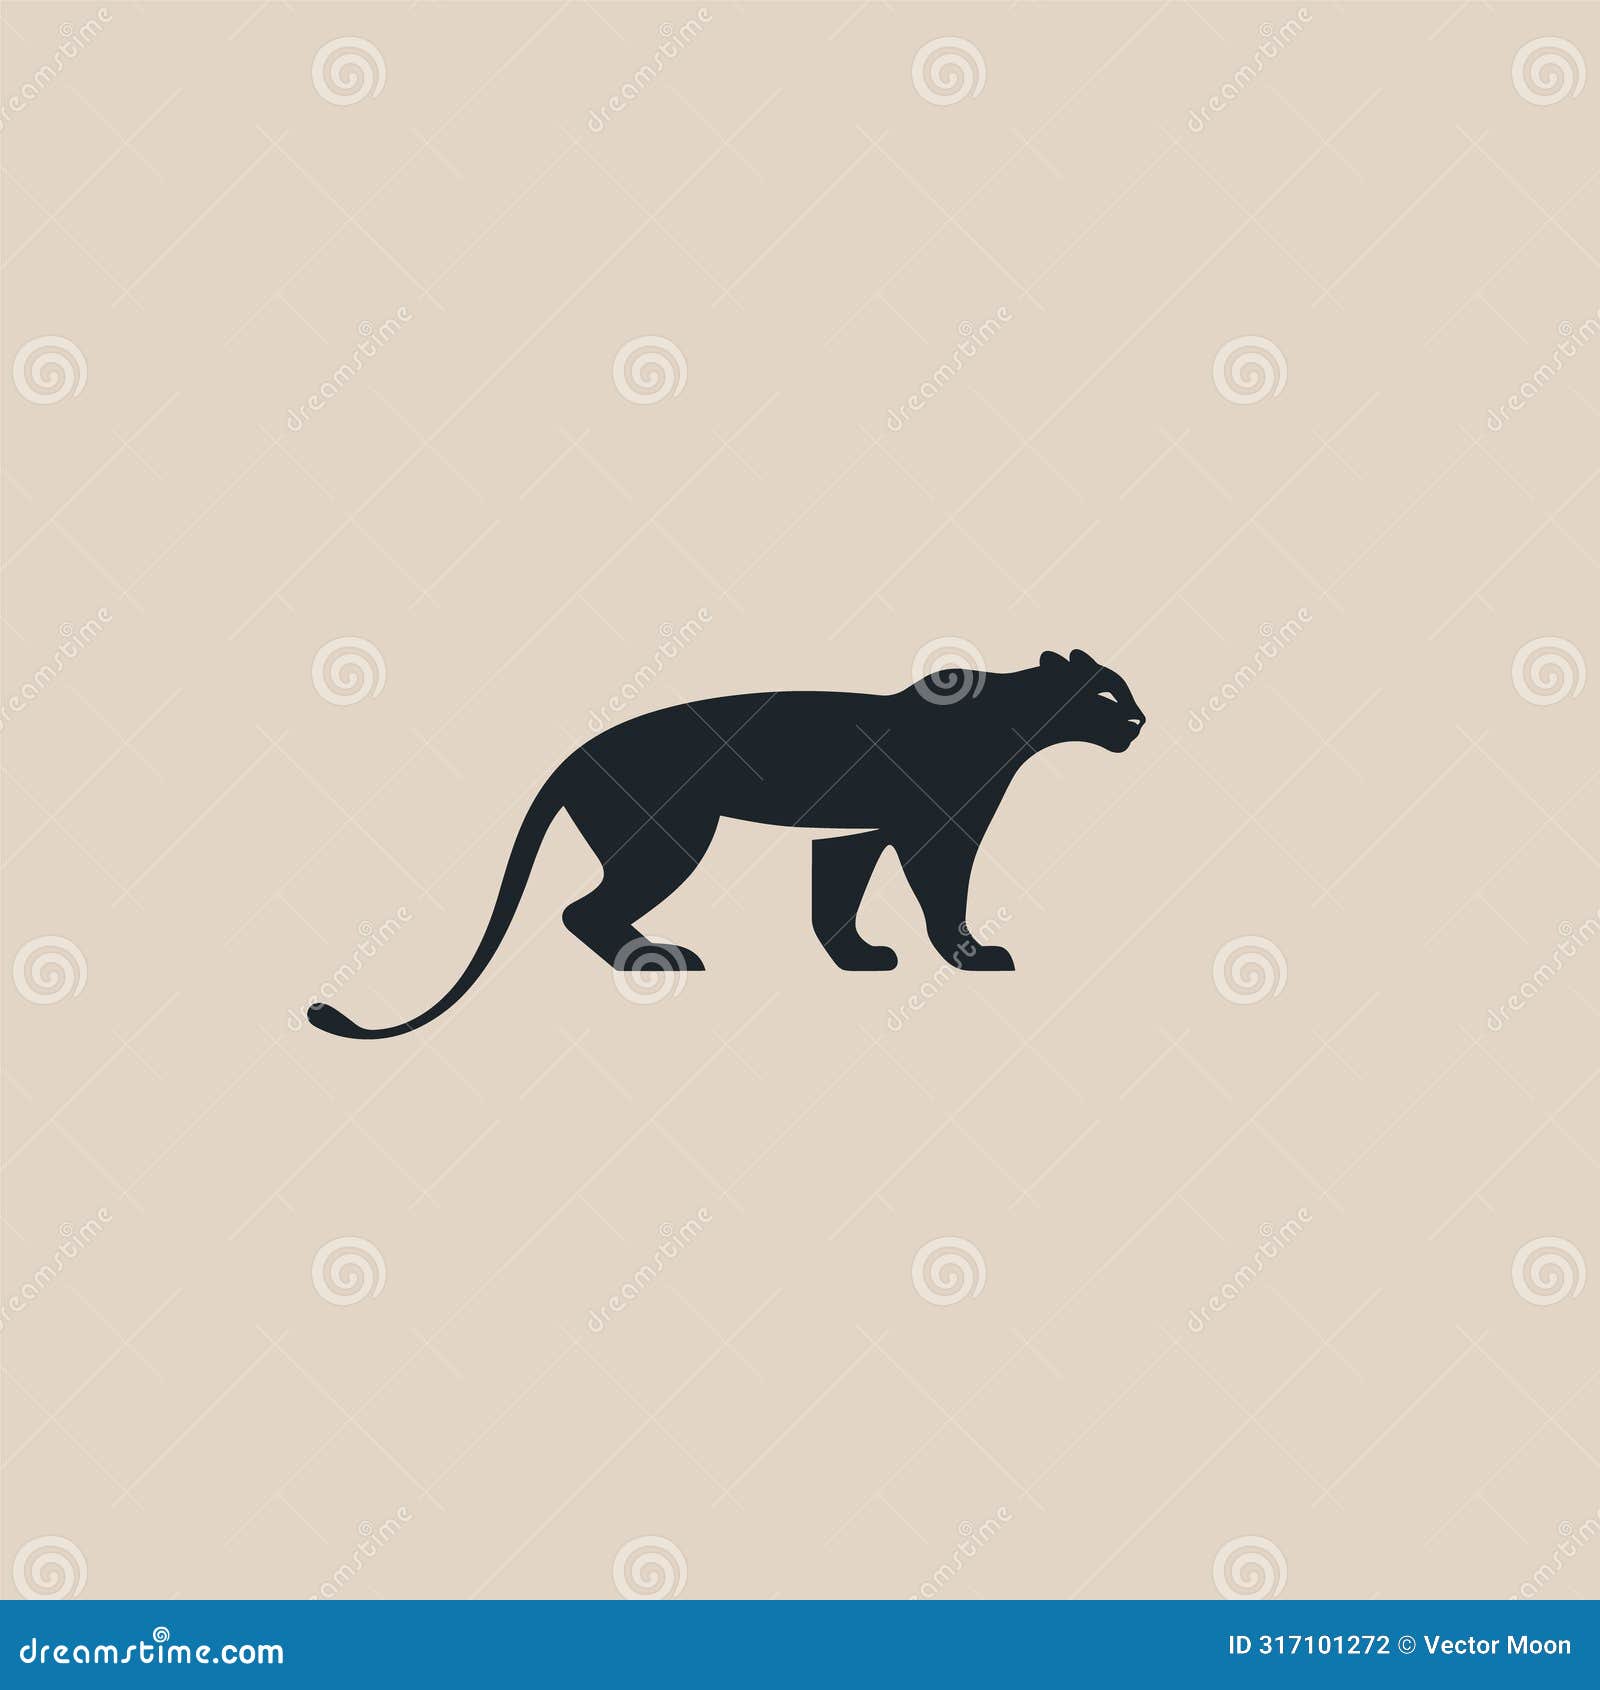 black panther silhouette, standing, beige background. simple stylized graphical panther